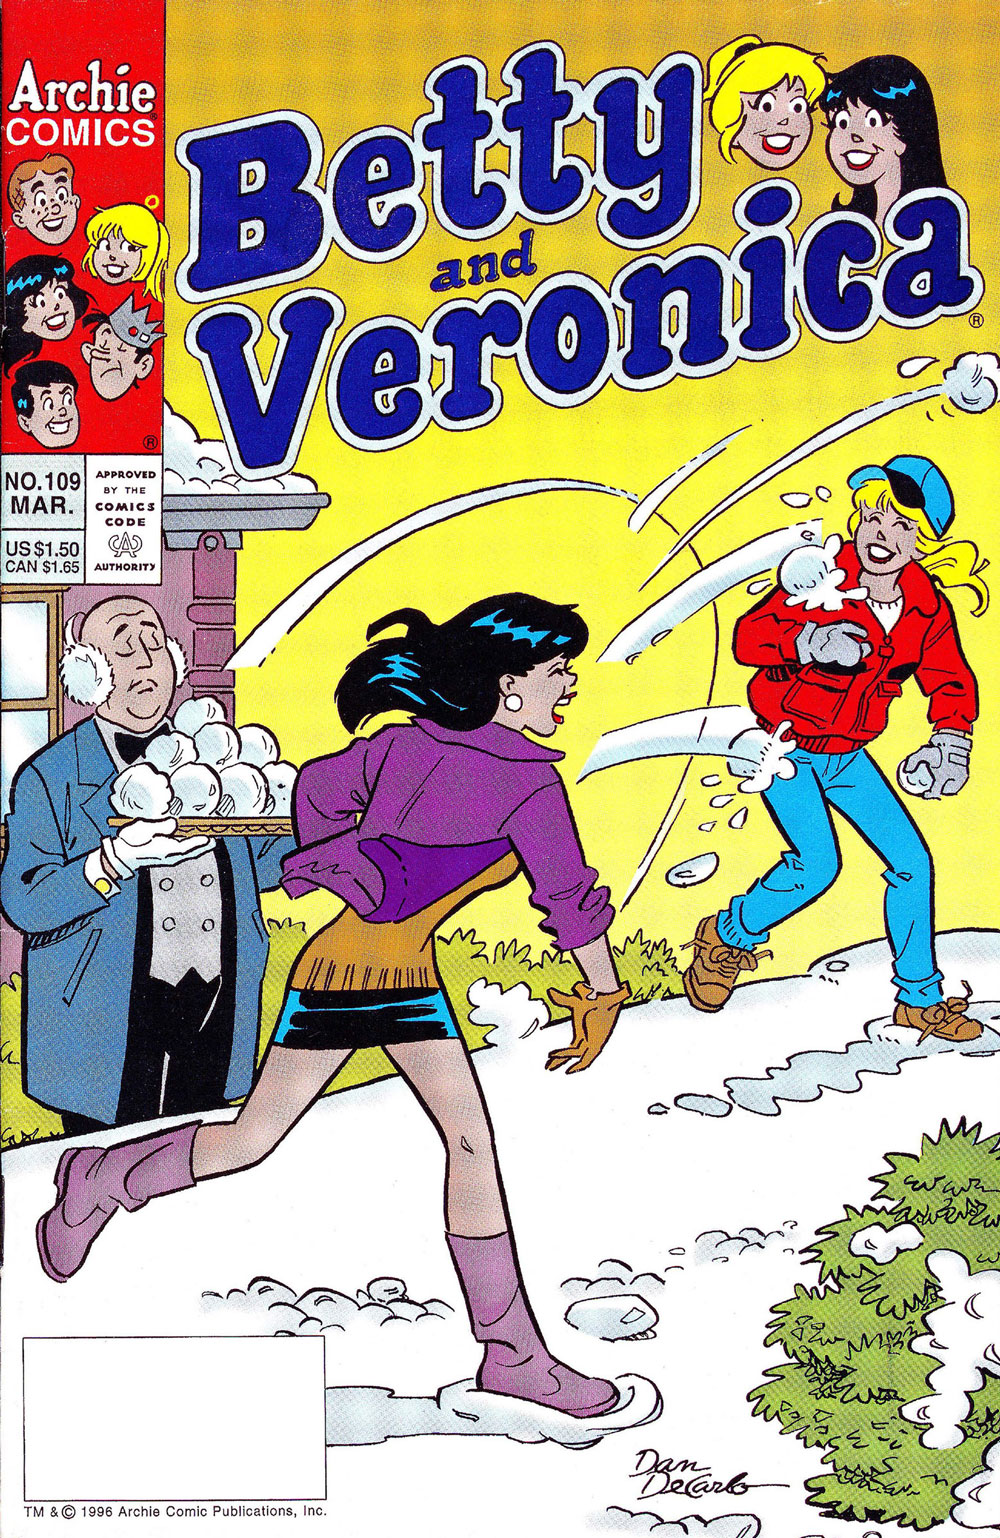 The cover of BETTY AND VERONICA #109. Betty and Veronica have a snowball fight while Smithers, Veronica's butler, holds a tray of snowballs for her to use.